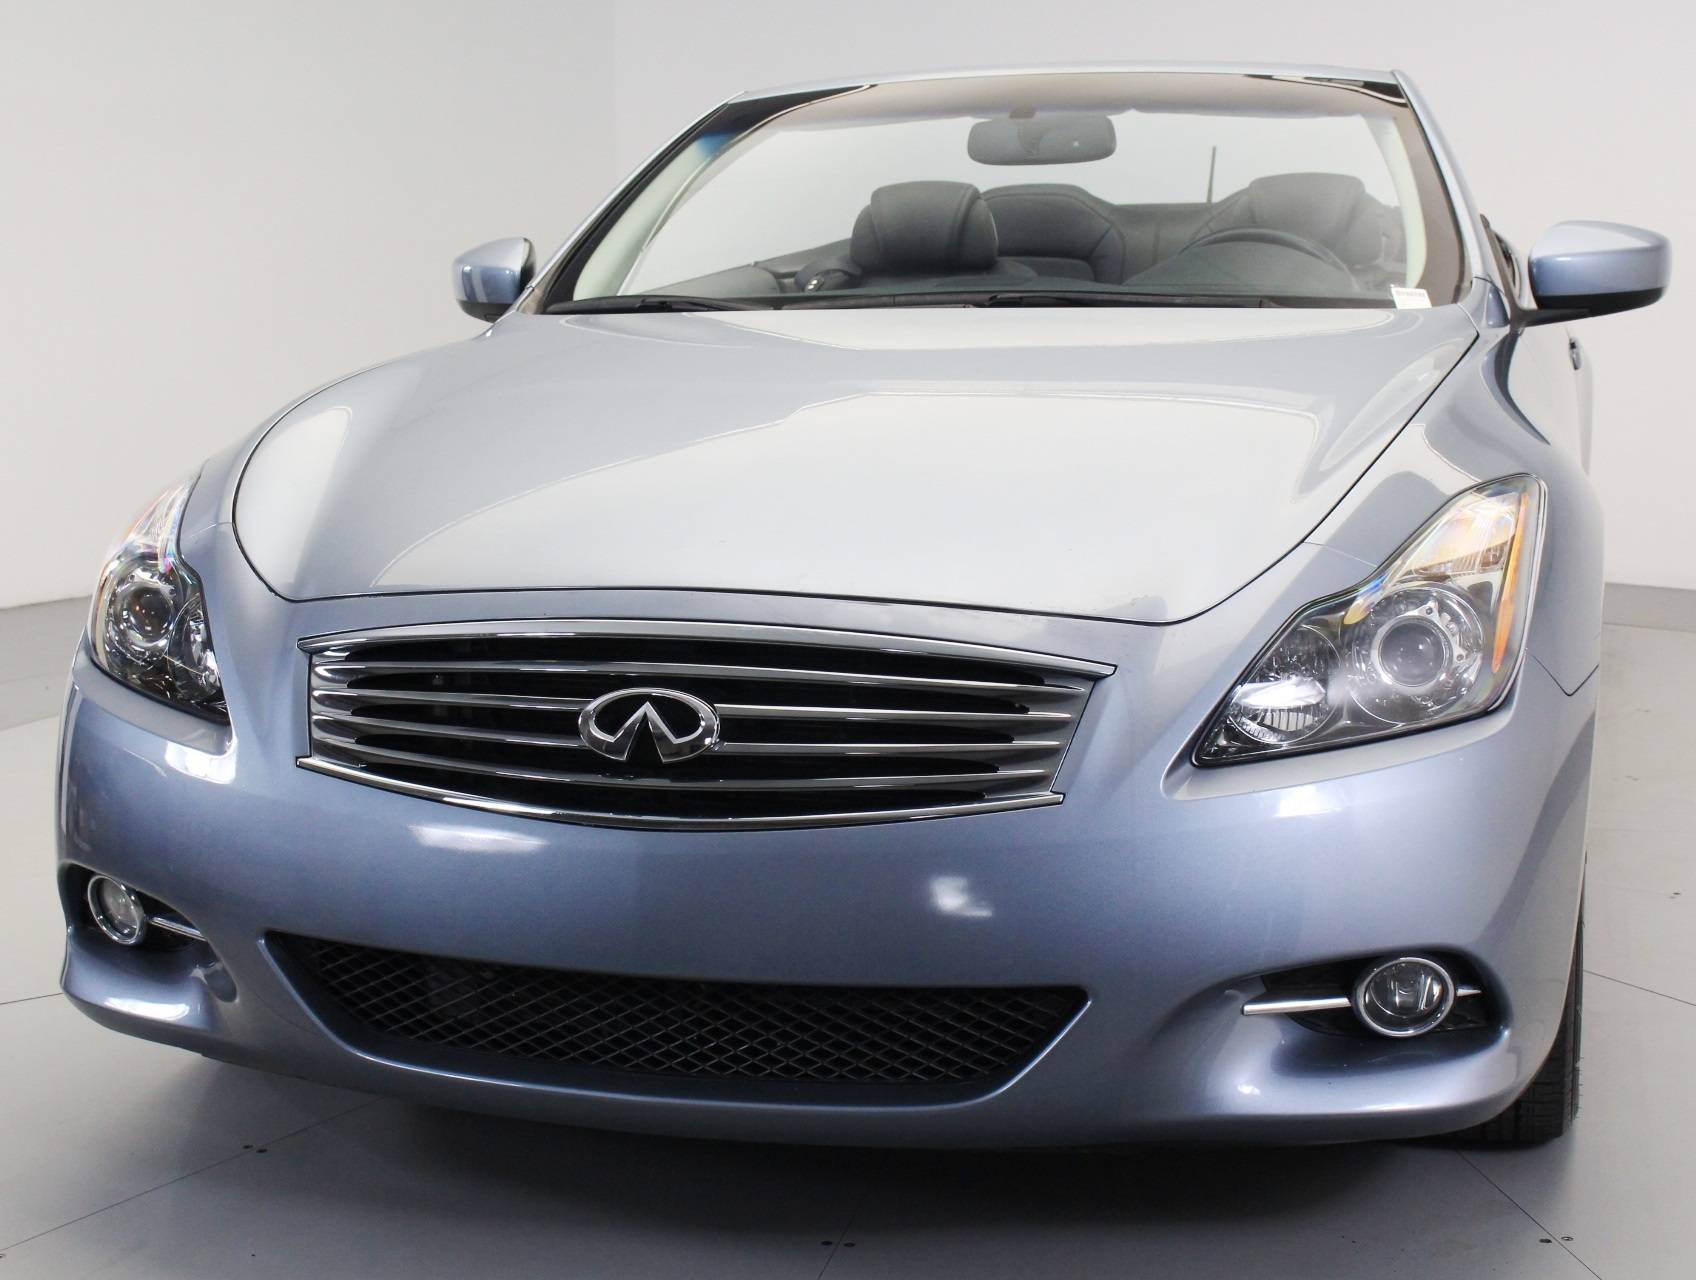 Florida Fine Cars - Used INFINITI Q60 2015 WEST PALM Convertible